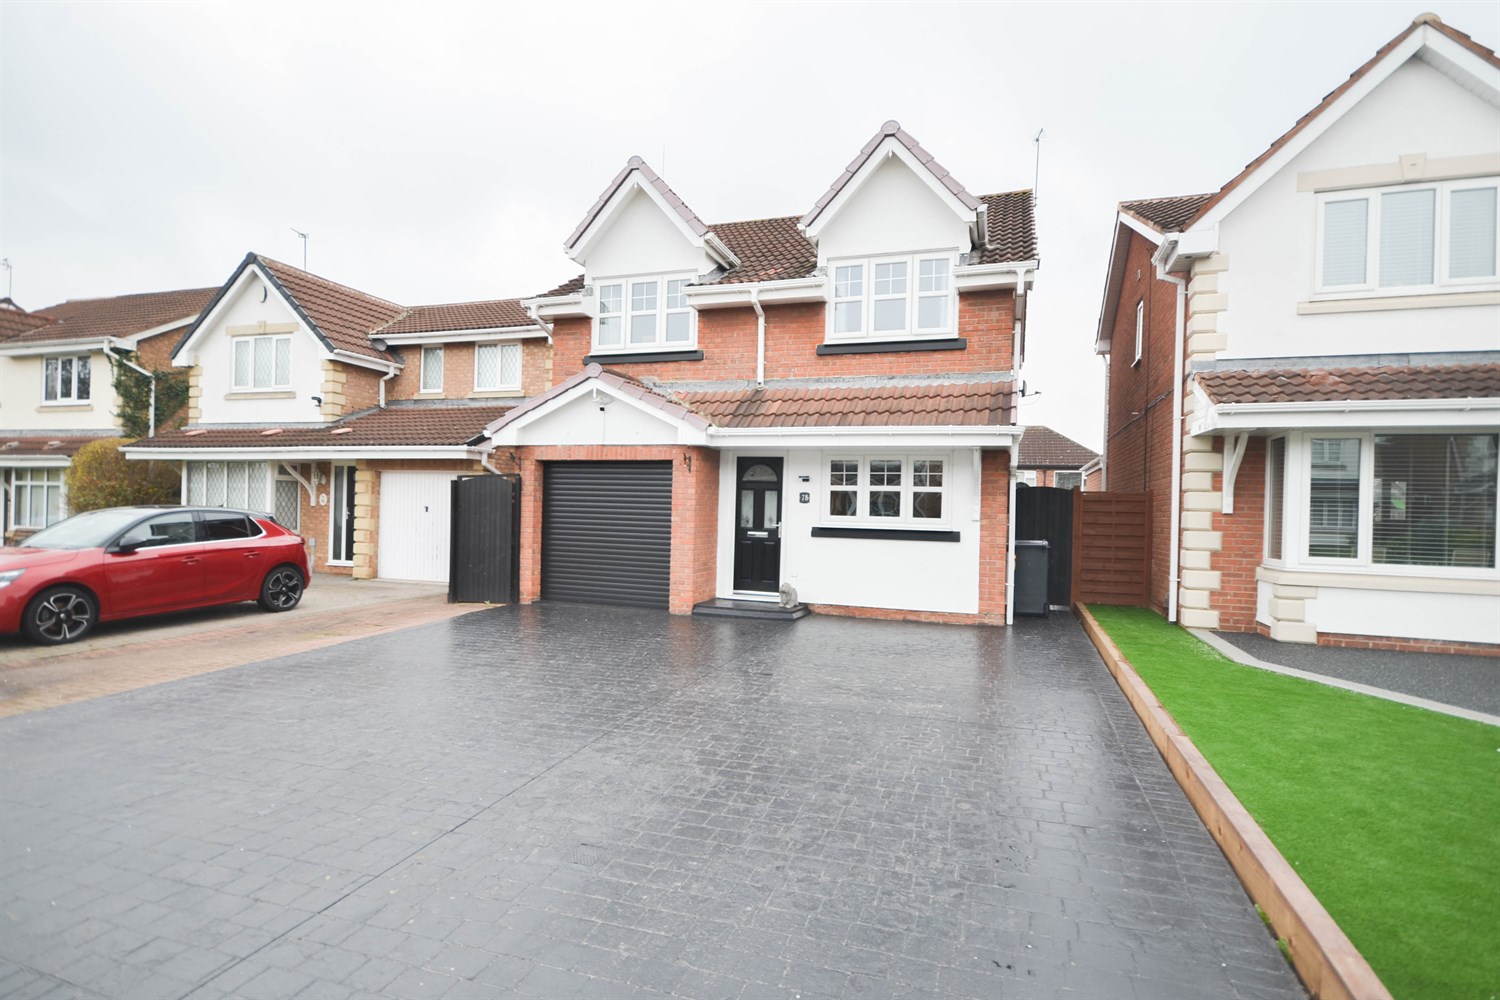 3 bed detached house for sale in The Cornfields, Hebburn - Property Image 1